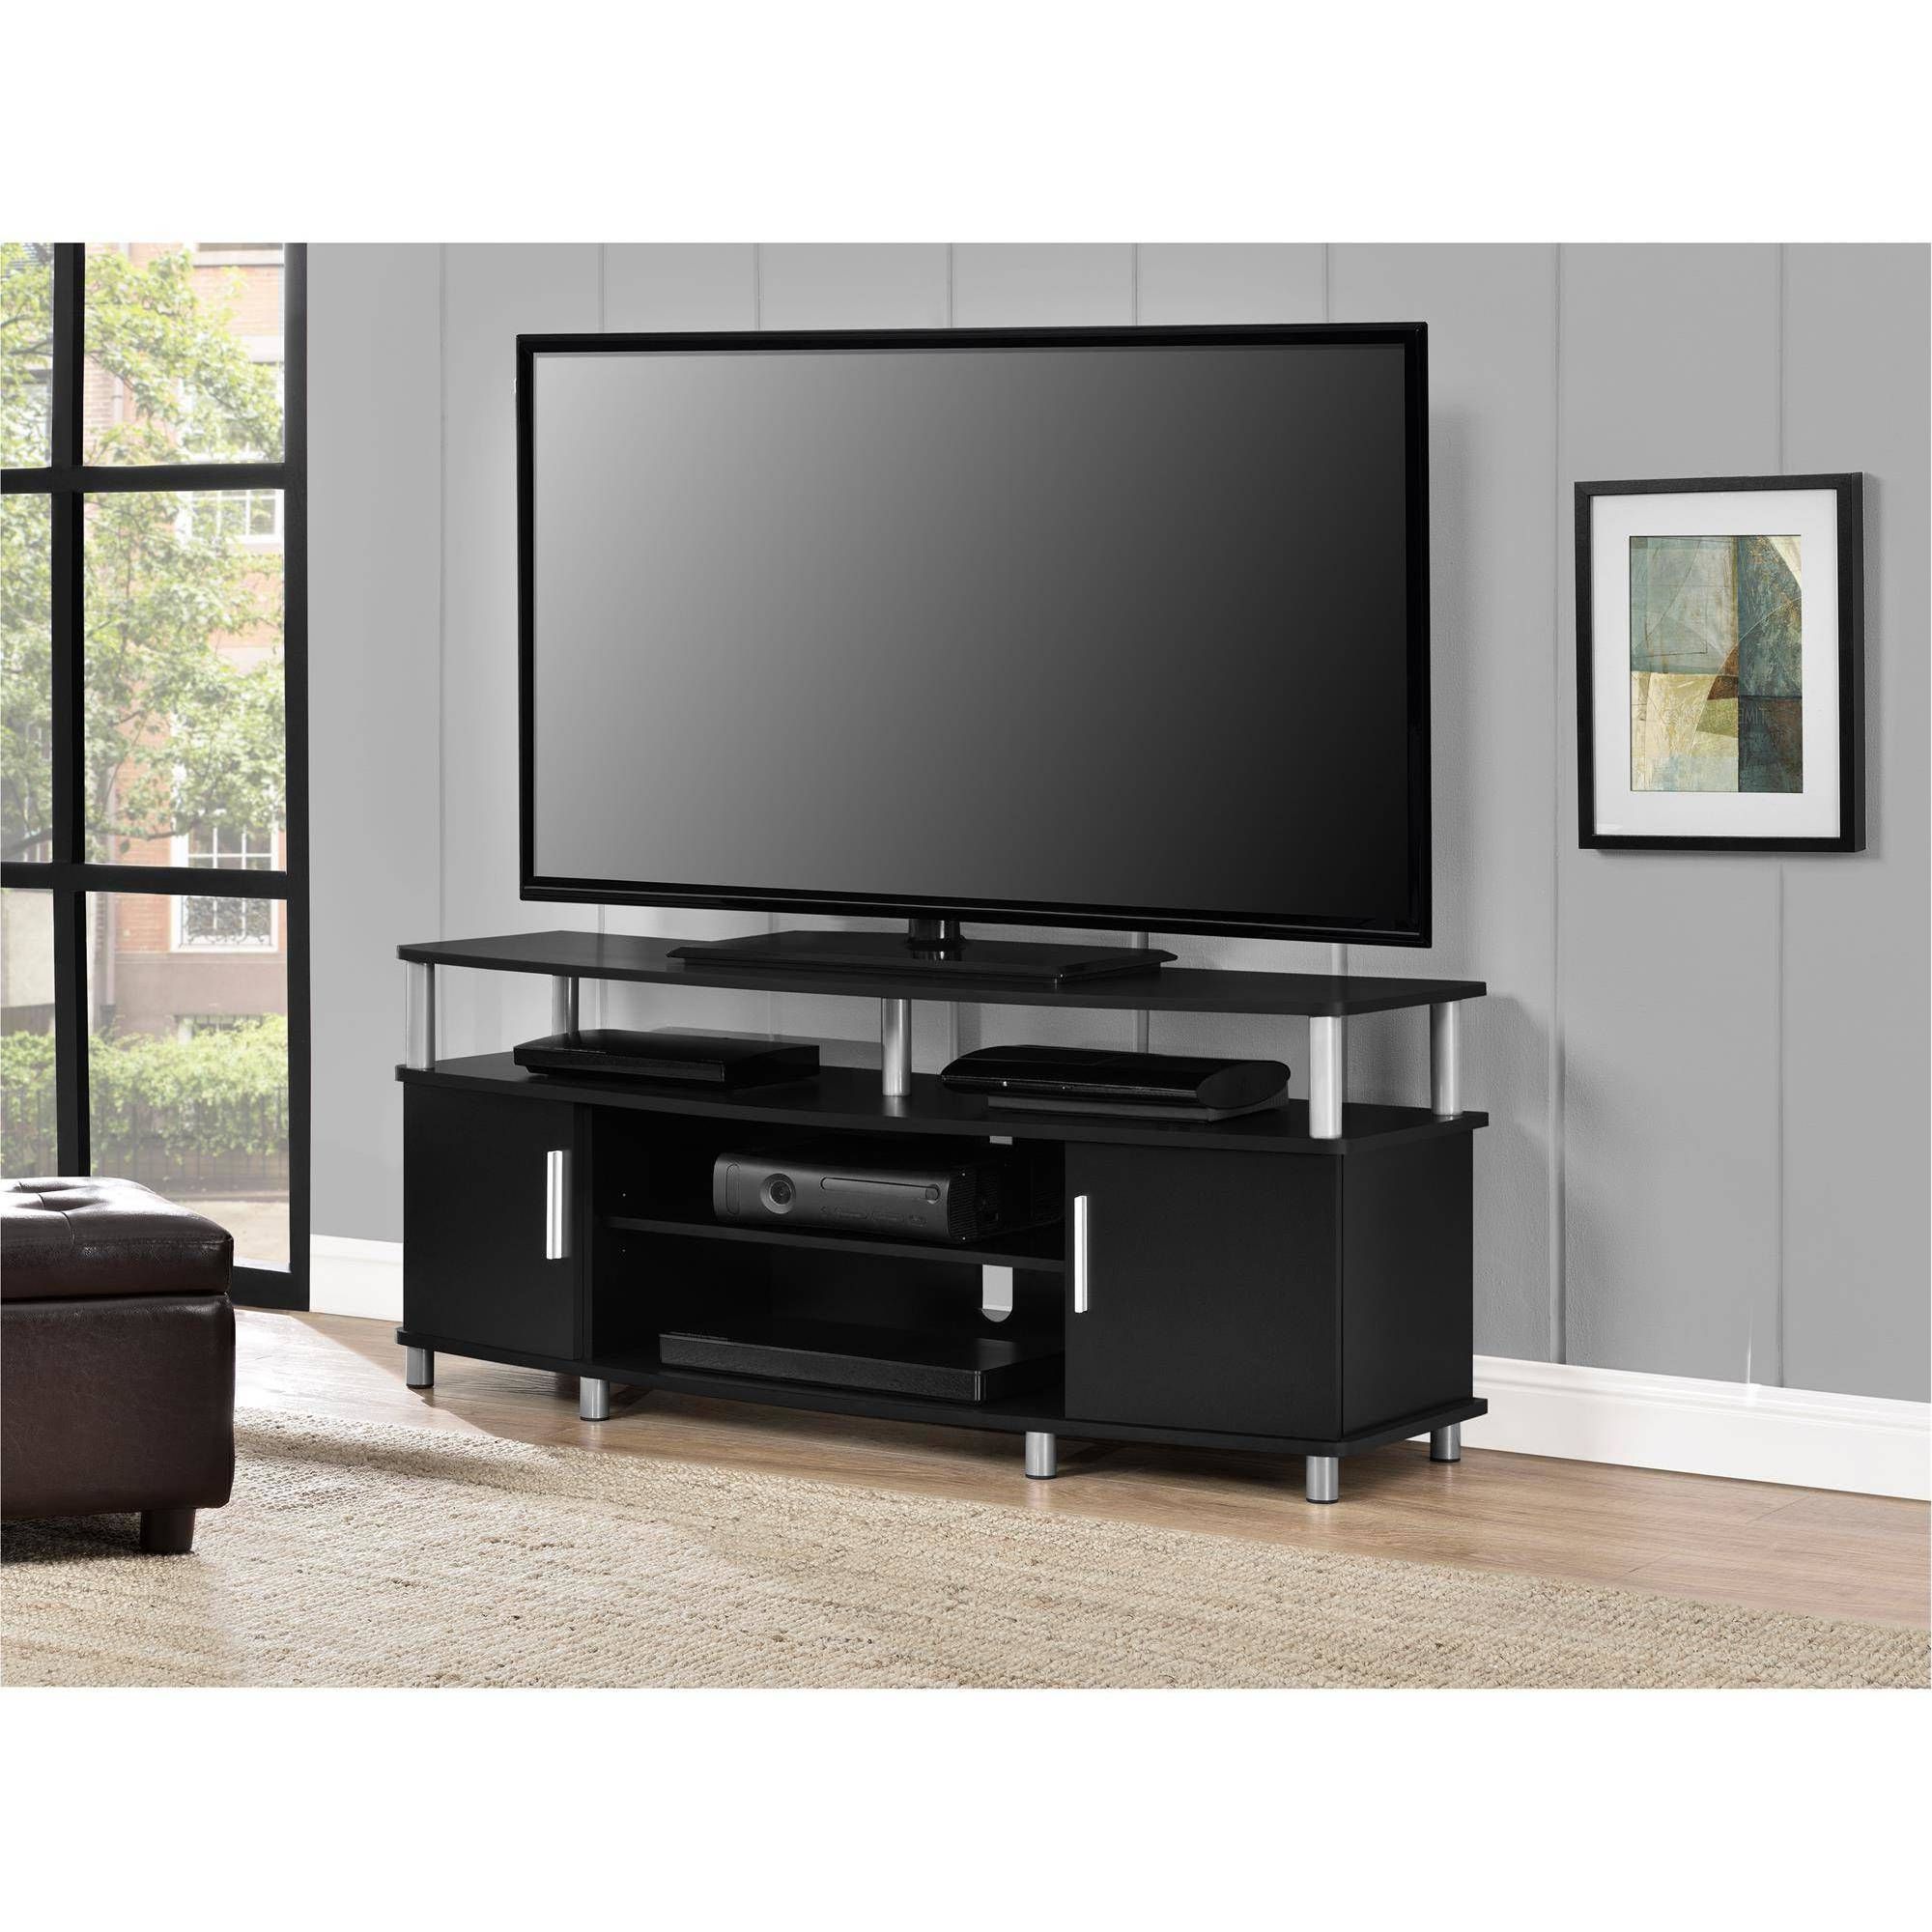 Carson Tv Stand For Tvs Up To 50" Wide, Black – Walmart For Deco Wide Tv Stands (View 4 of 20)